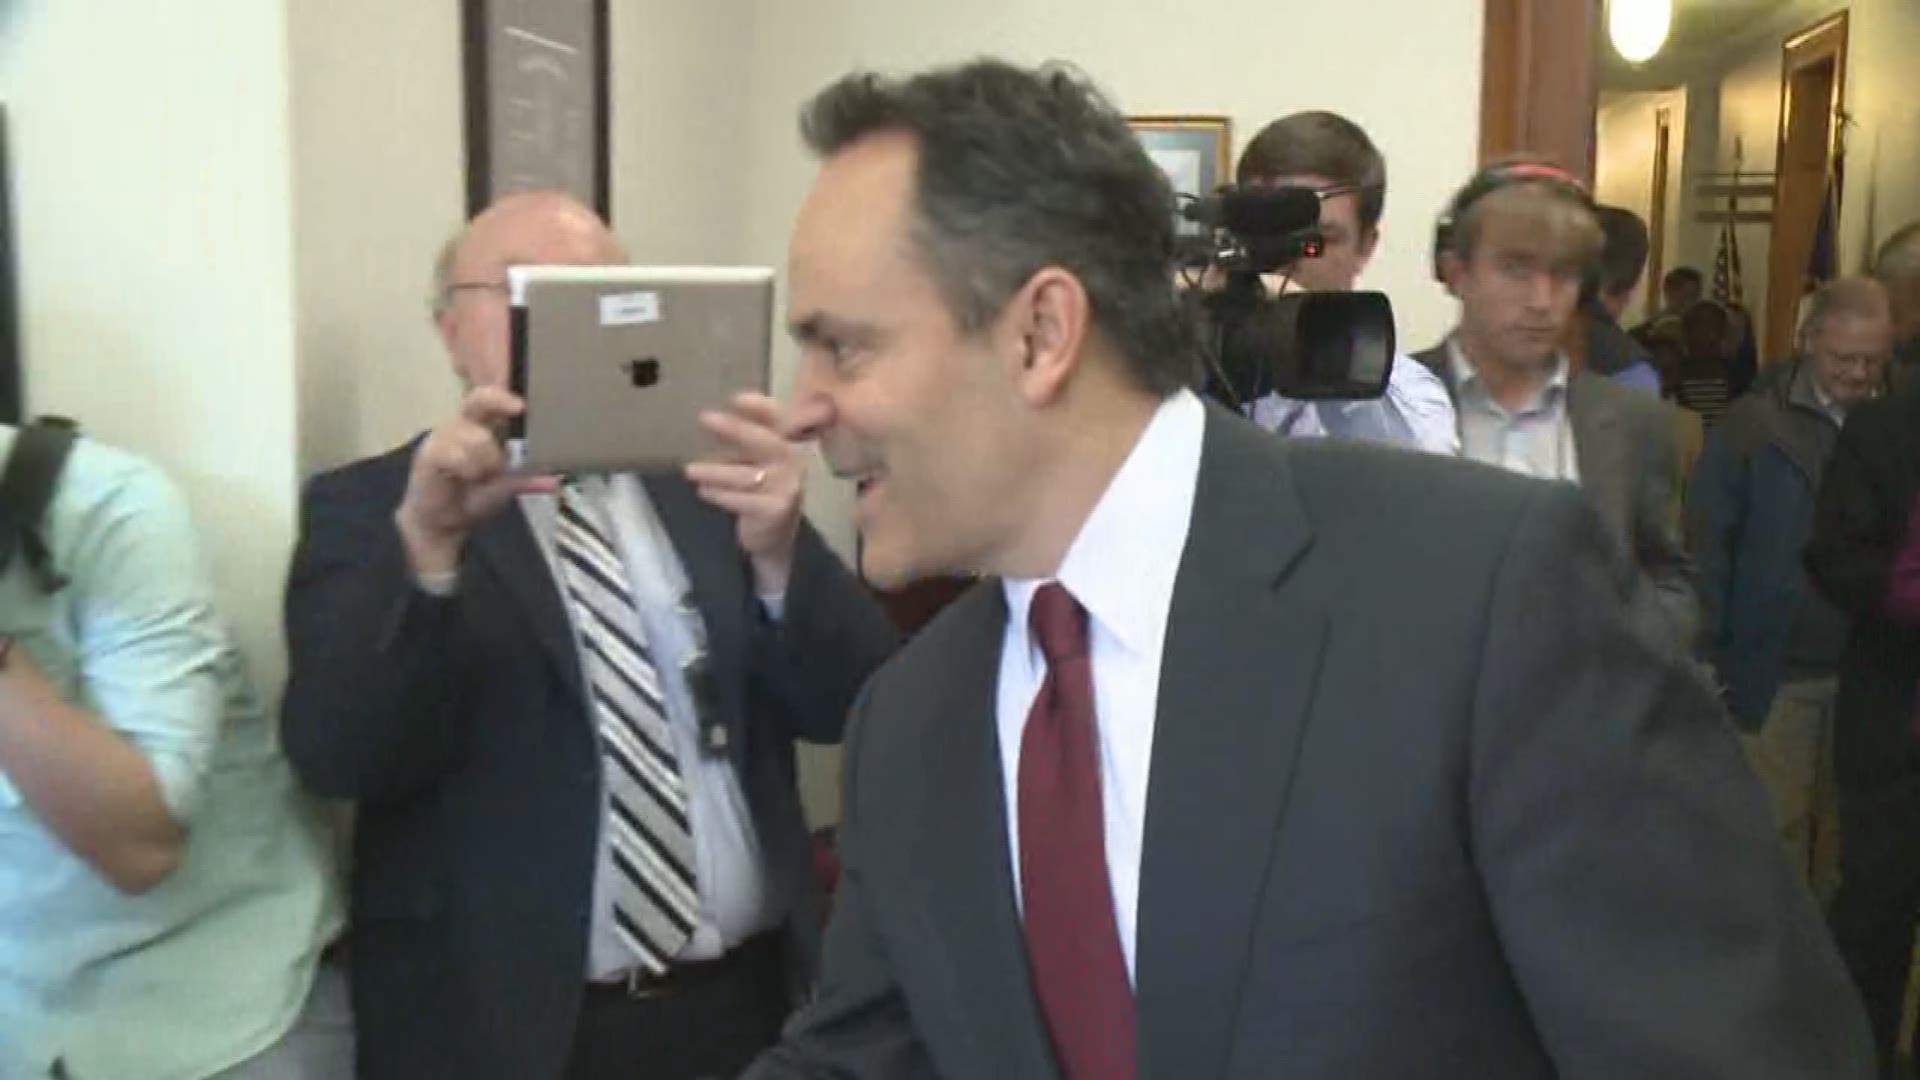 In separate radio interviews, Governor Matt Bevin talks about the culture of violence and why he's fighting to keep the state's new abortion law.